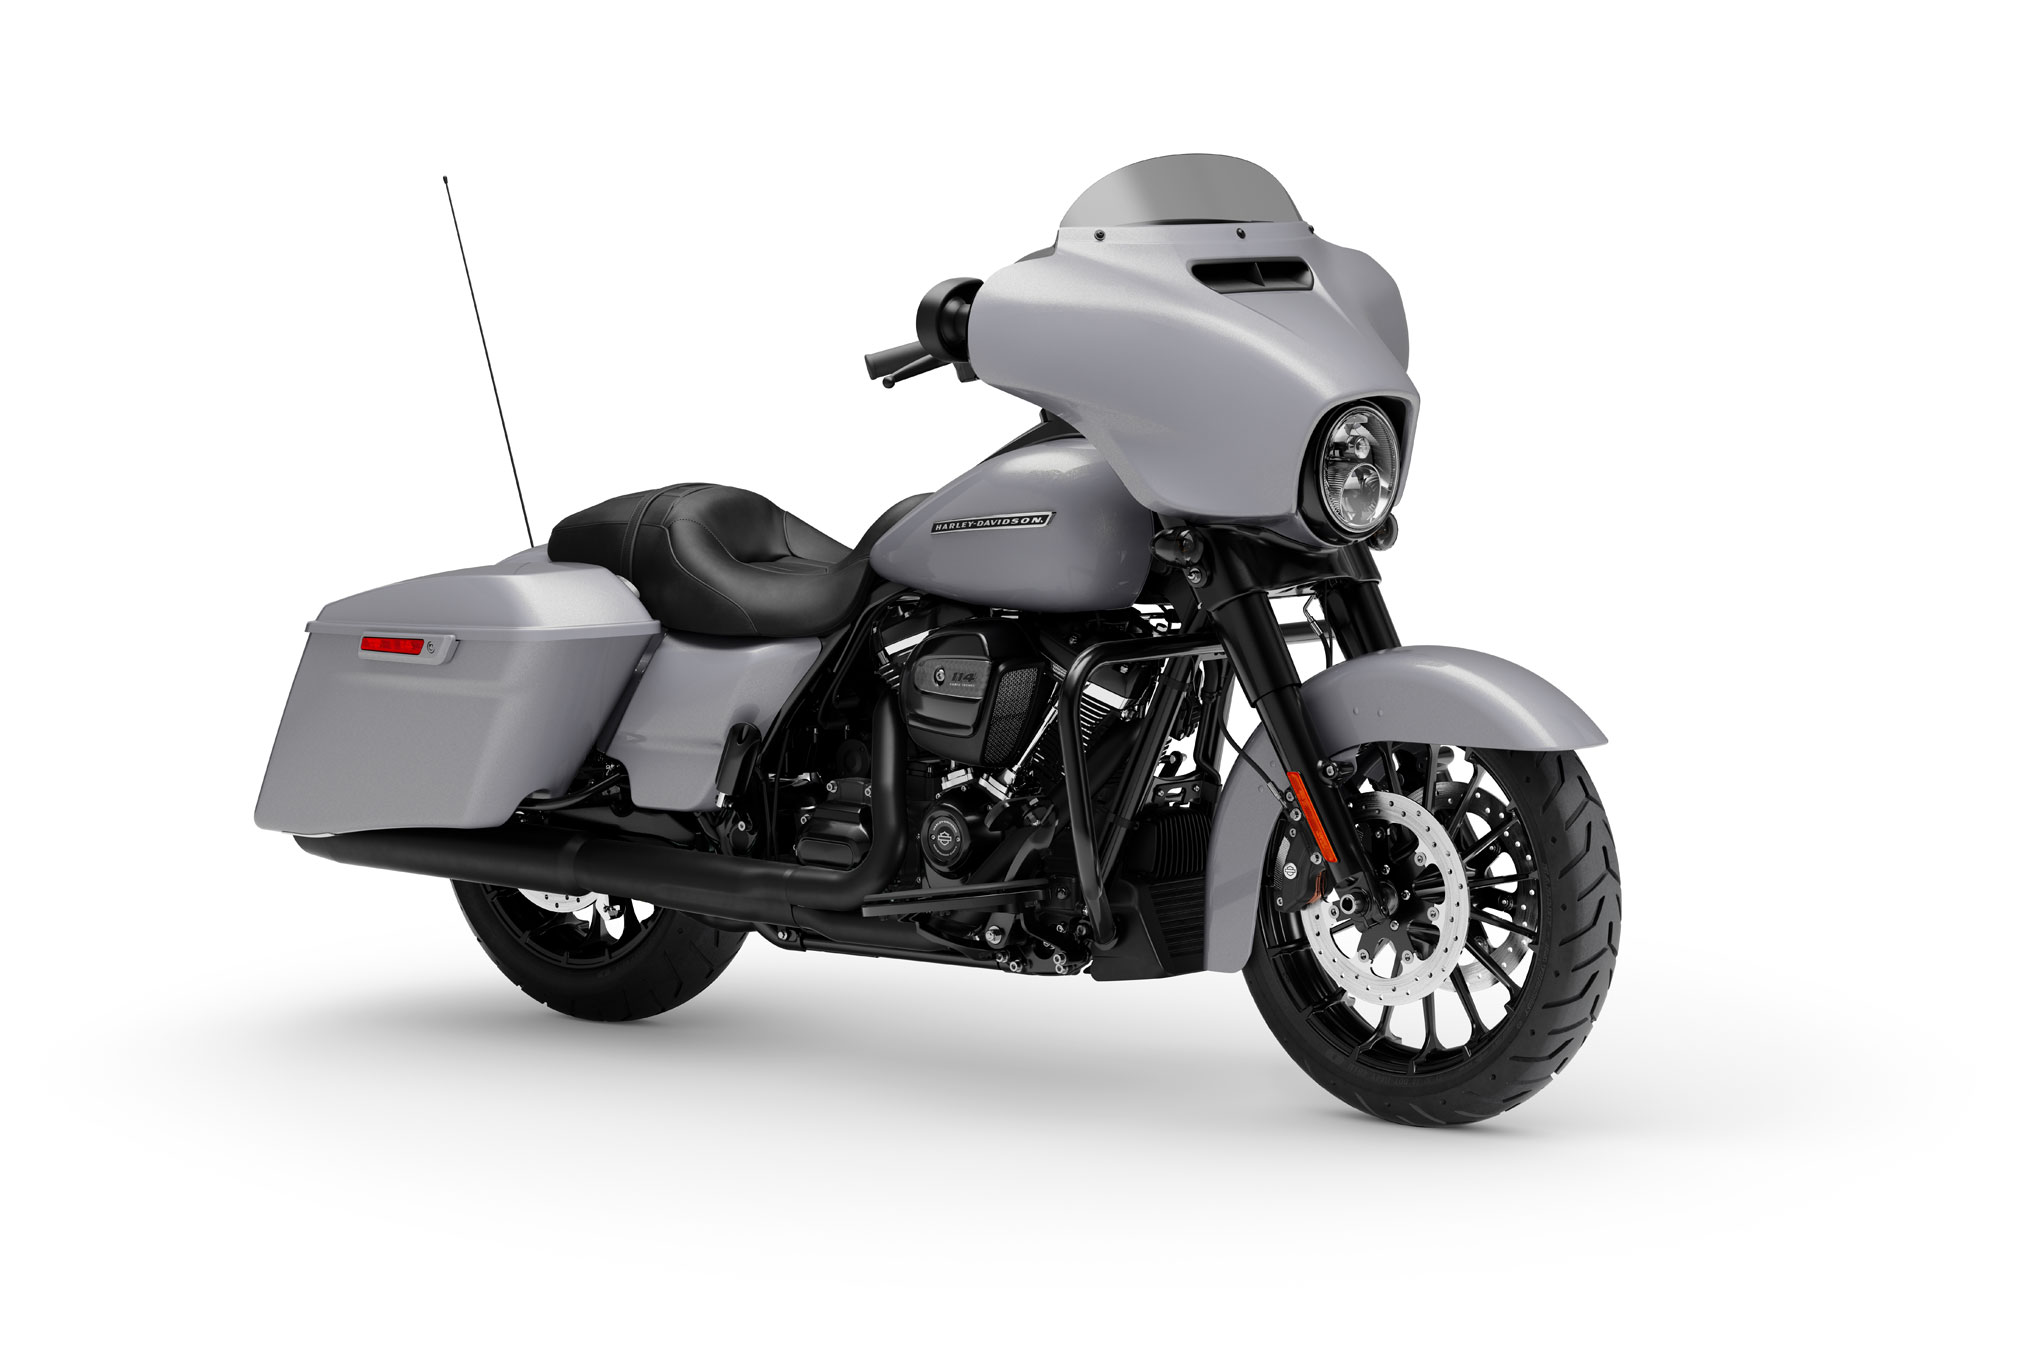 2020 Harley-Davidson Street Glide Special Guide • Total Motorcycle